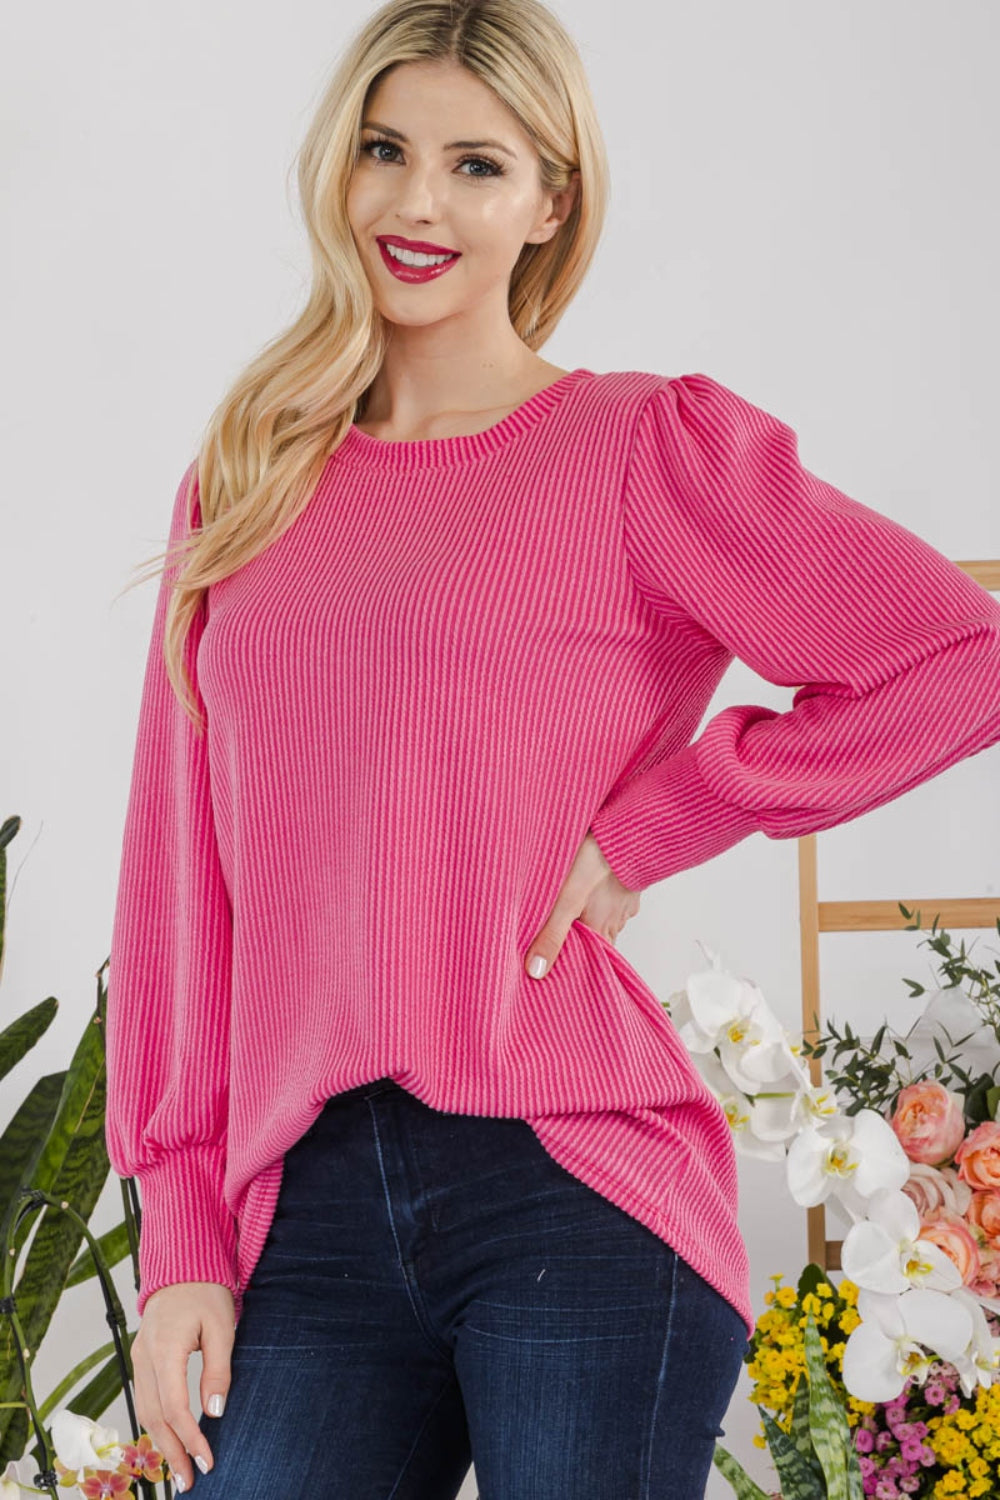 Striped Round Neck Lantern Sleeve Top - Pink / S - Tops & Tees - Shirts & Tops - 1 - 2024